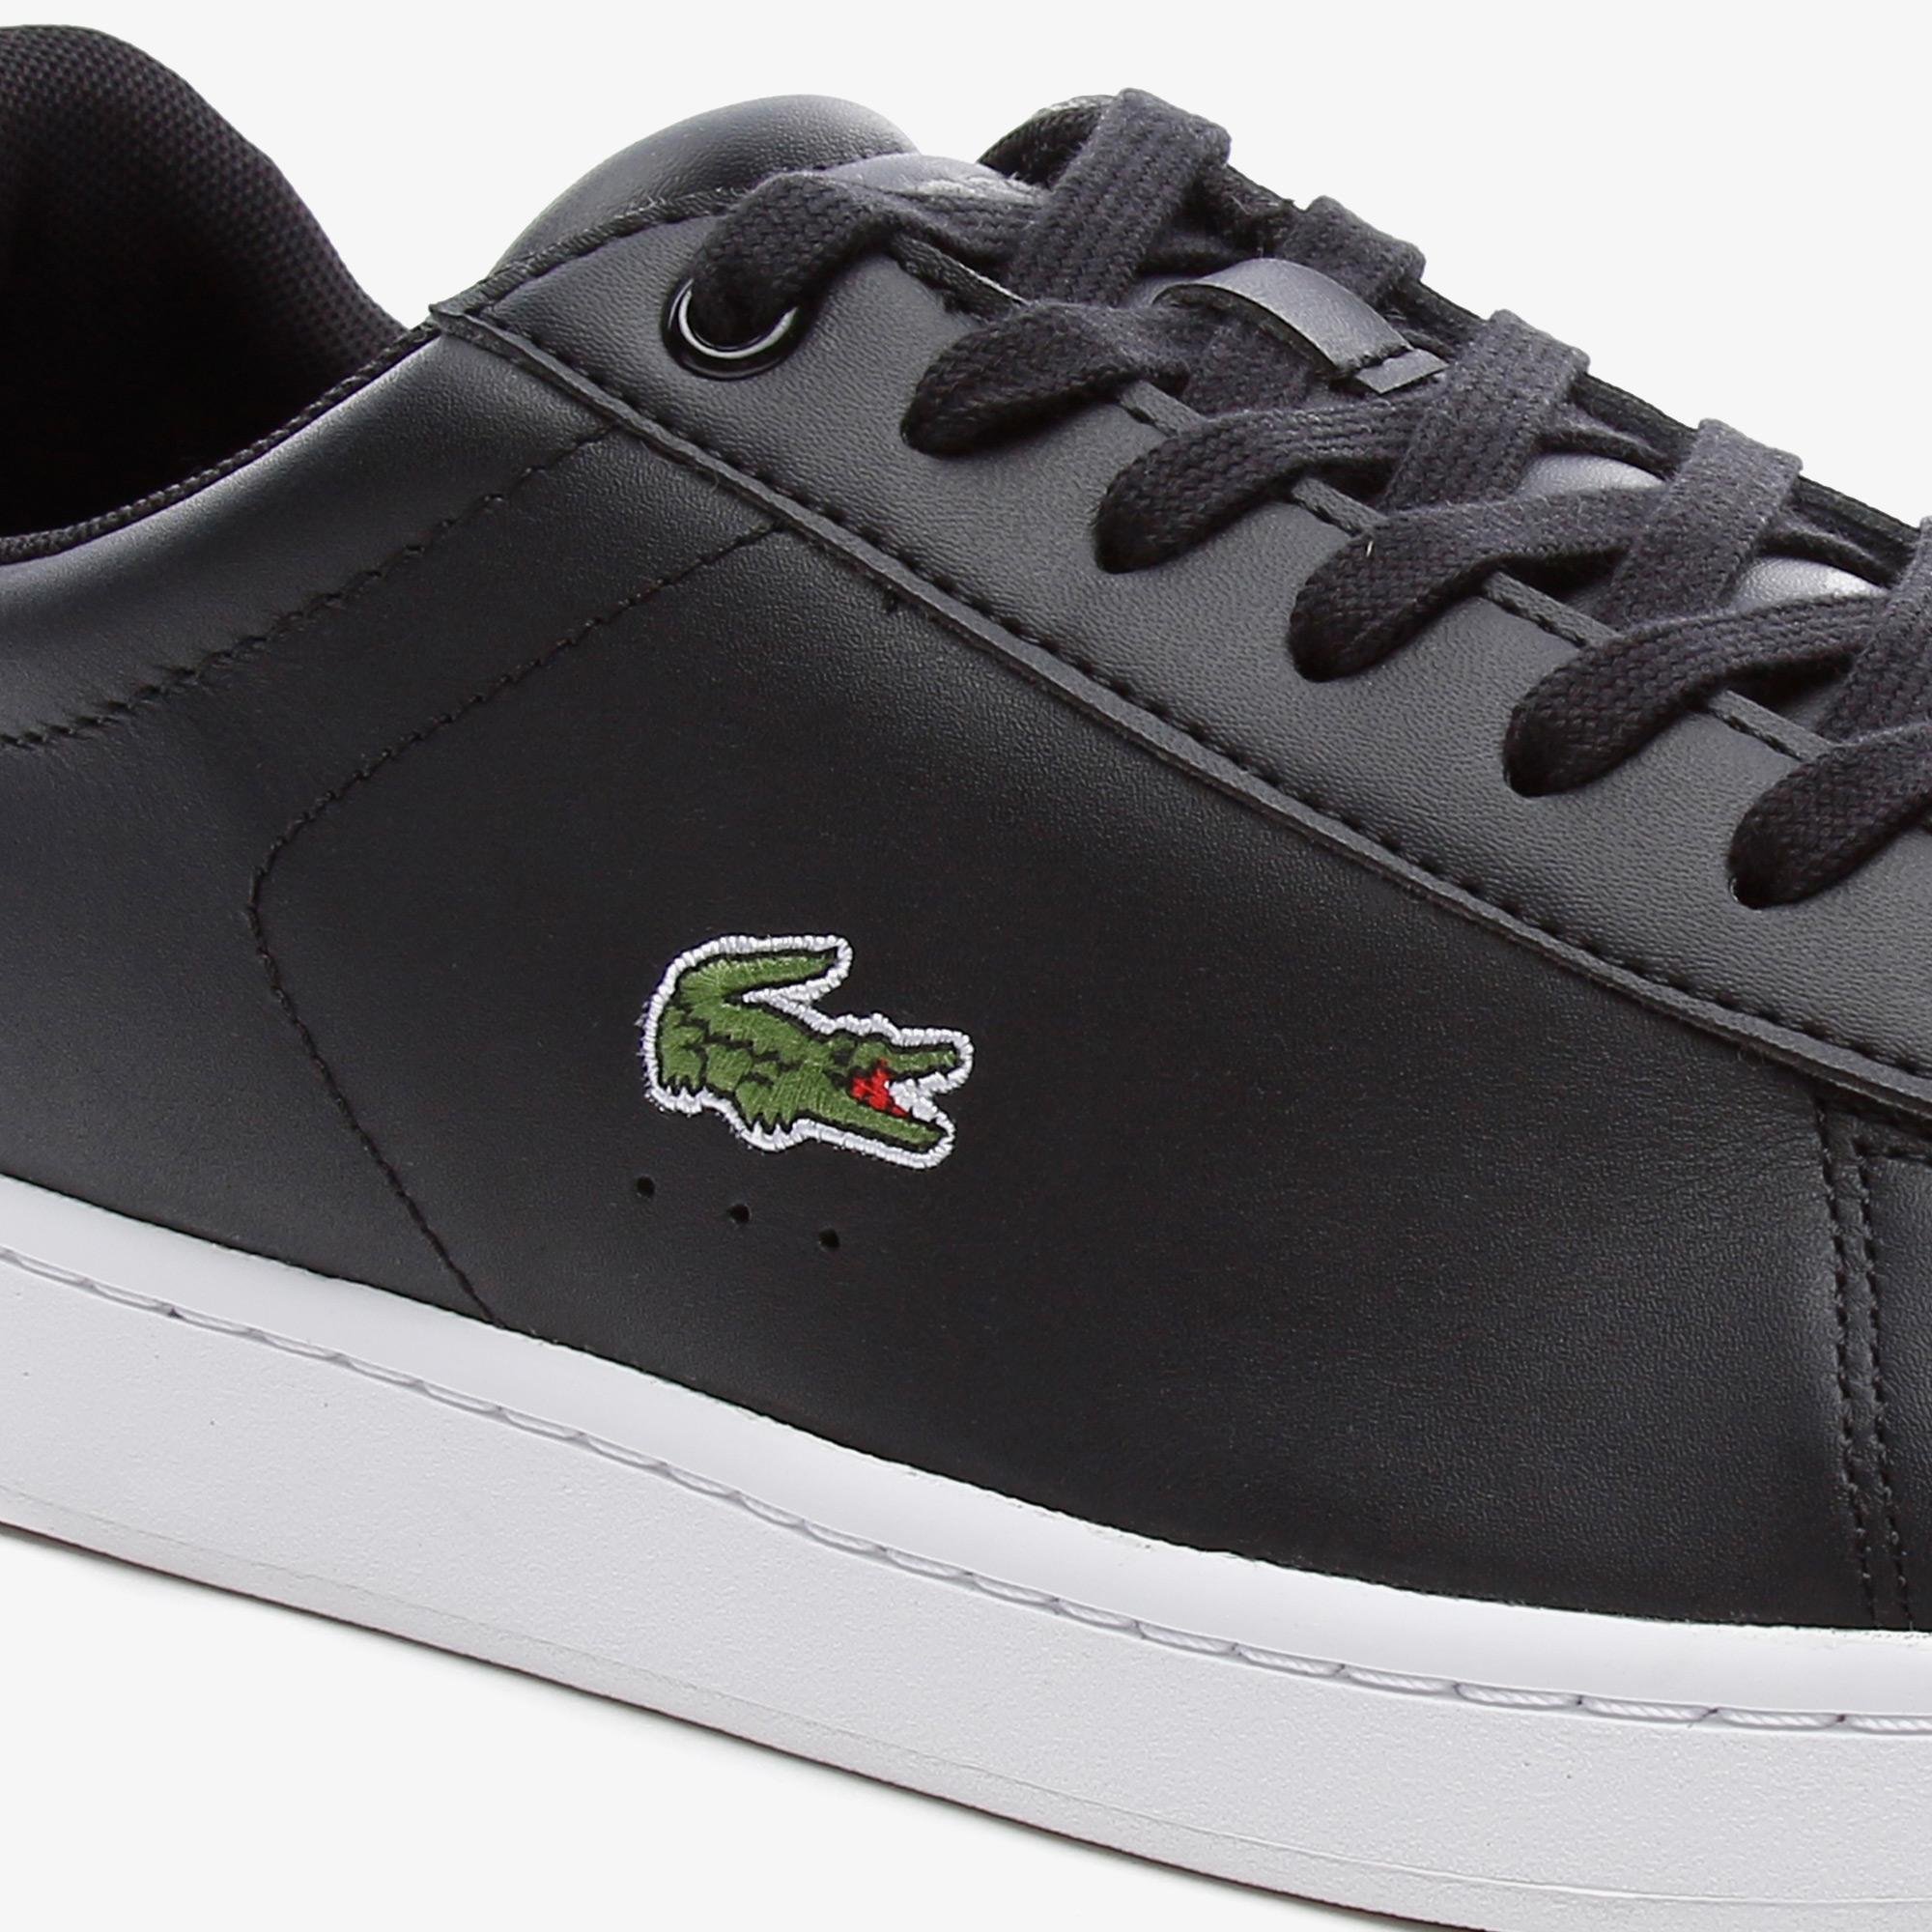 Lacoste Men's Carnaby BL Leather Trainers